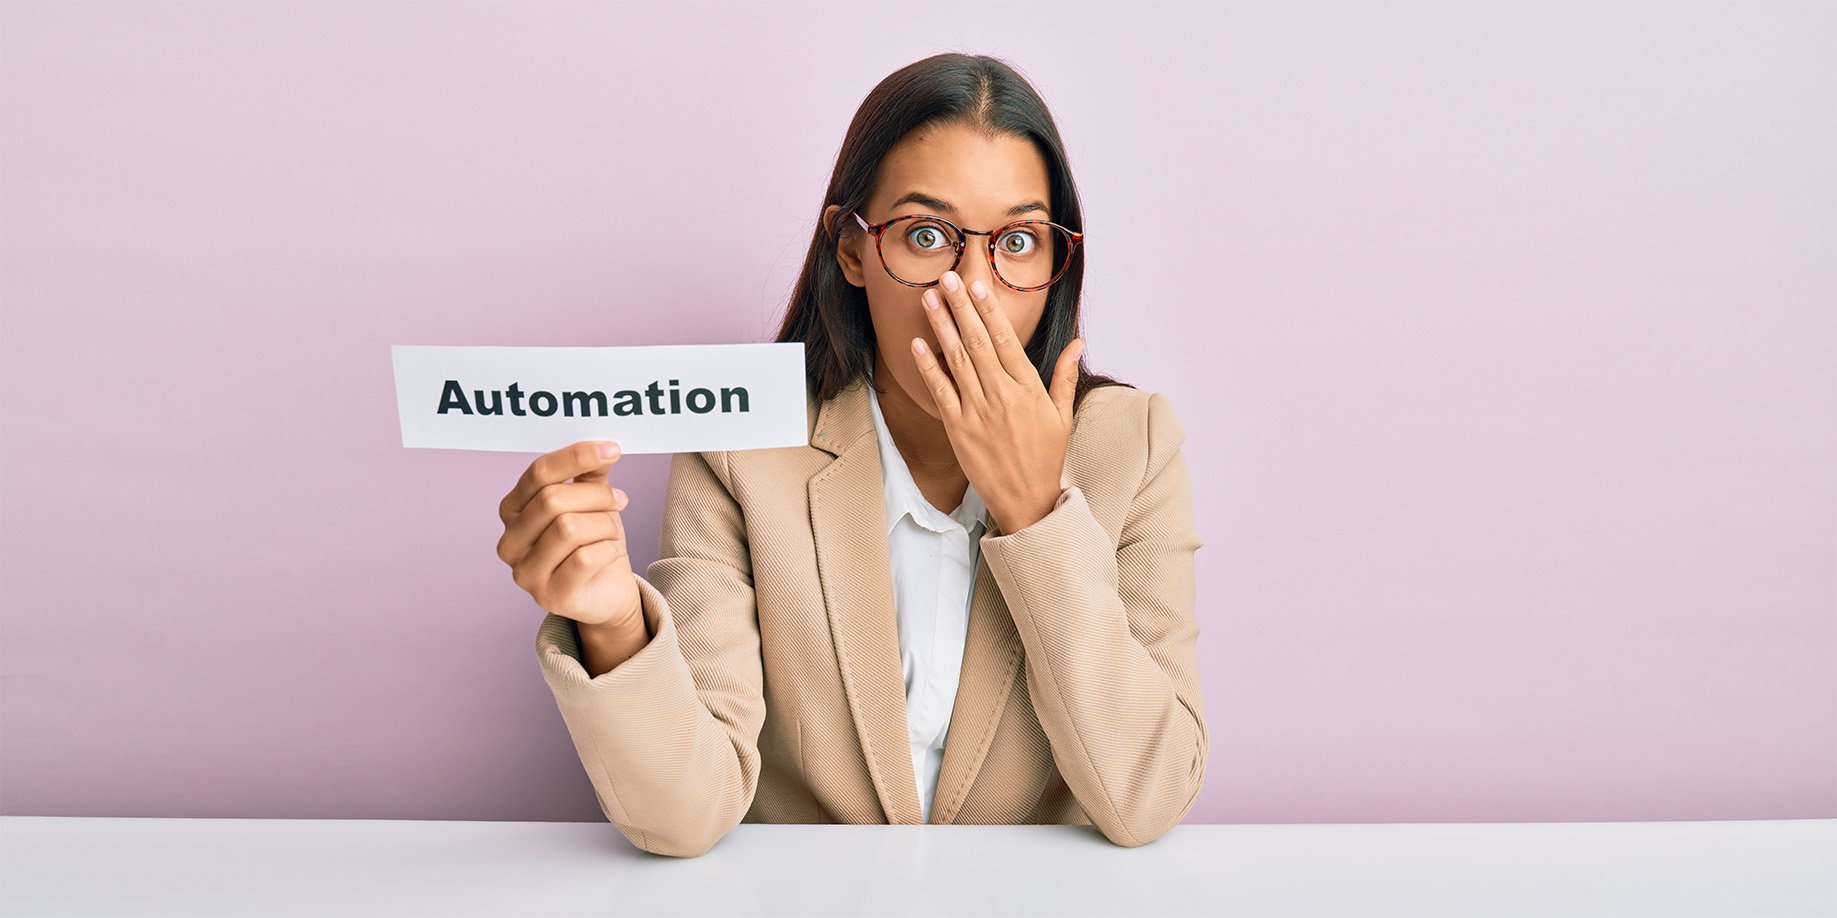 Companies fear automation before they embrace it.